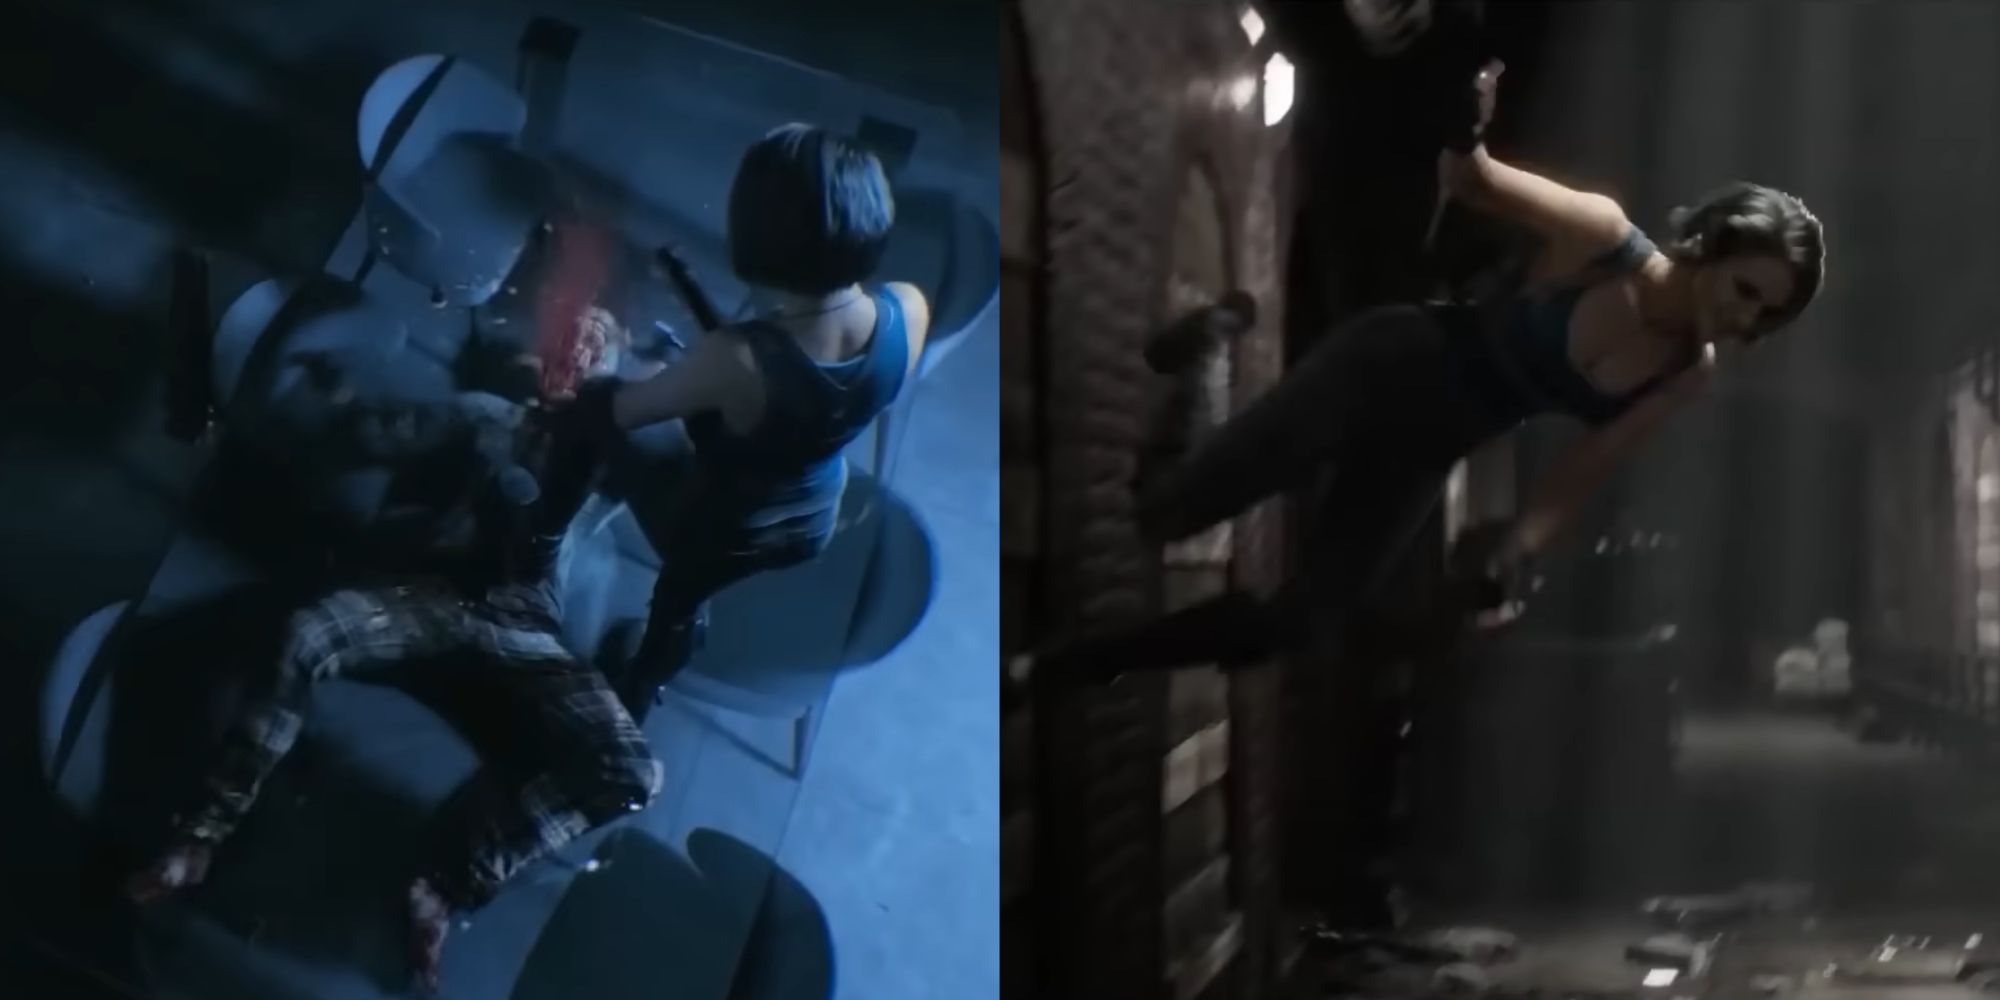 Split image of Jill standing on the table, Zombie shooting and Jill running in the trailer.